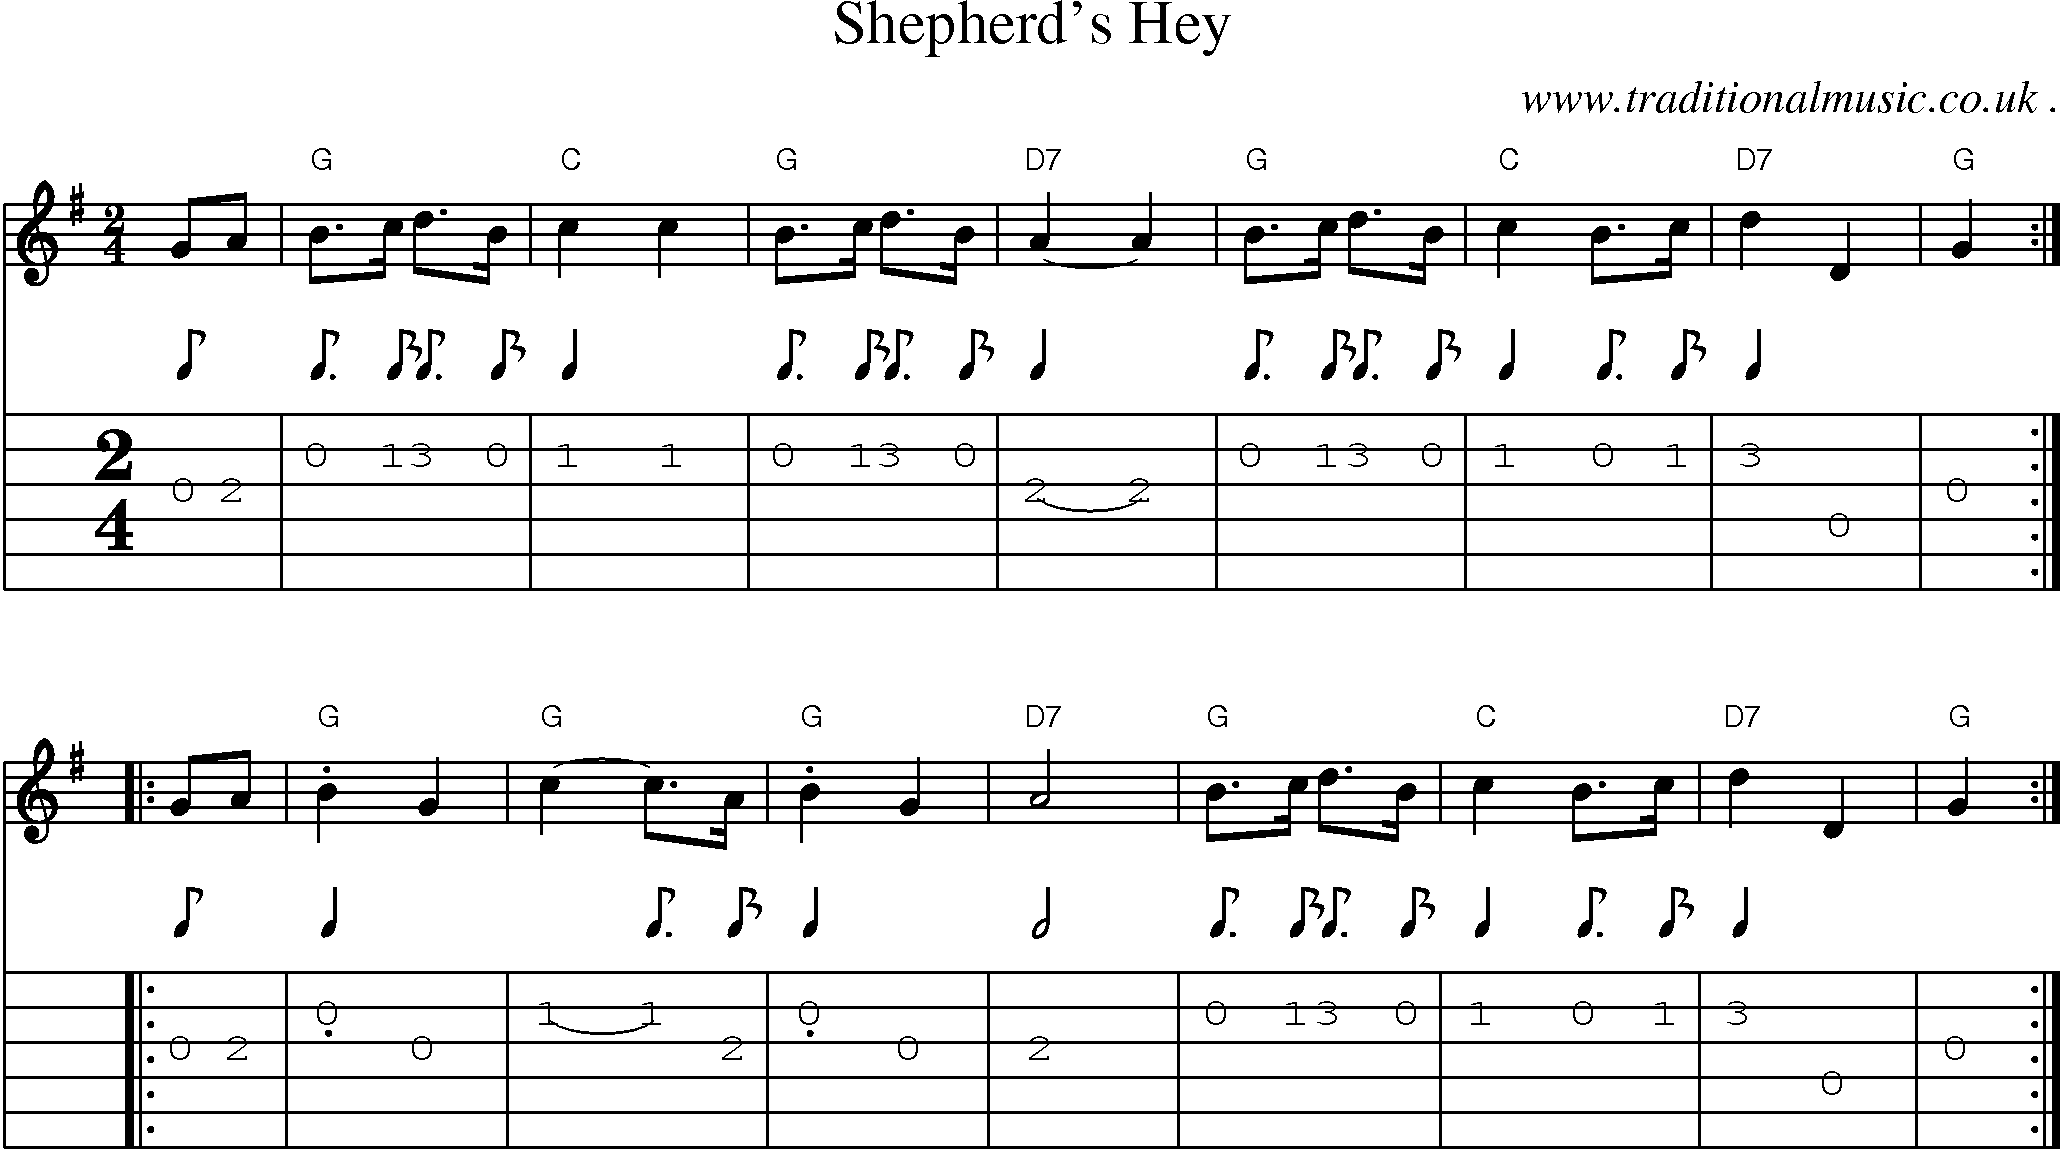 Music Score and Guitar Tabs for Shepherds Hey